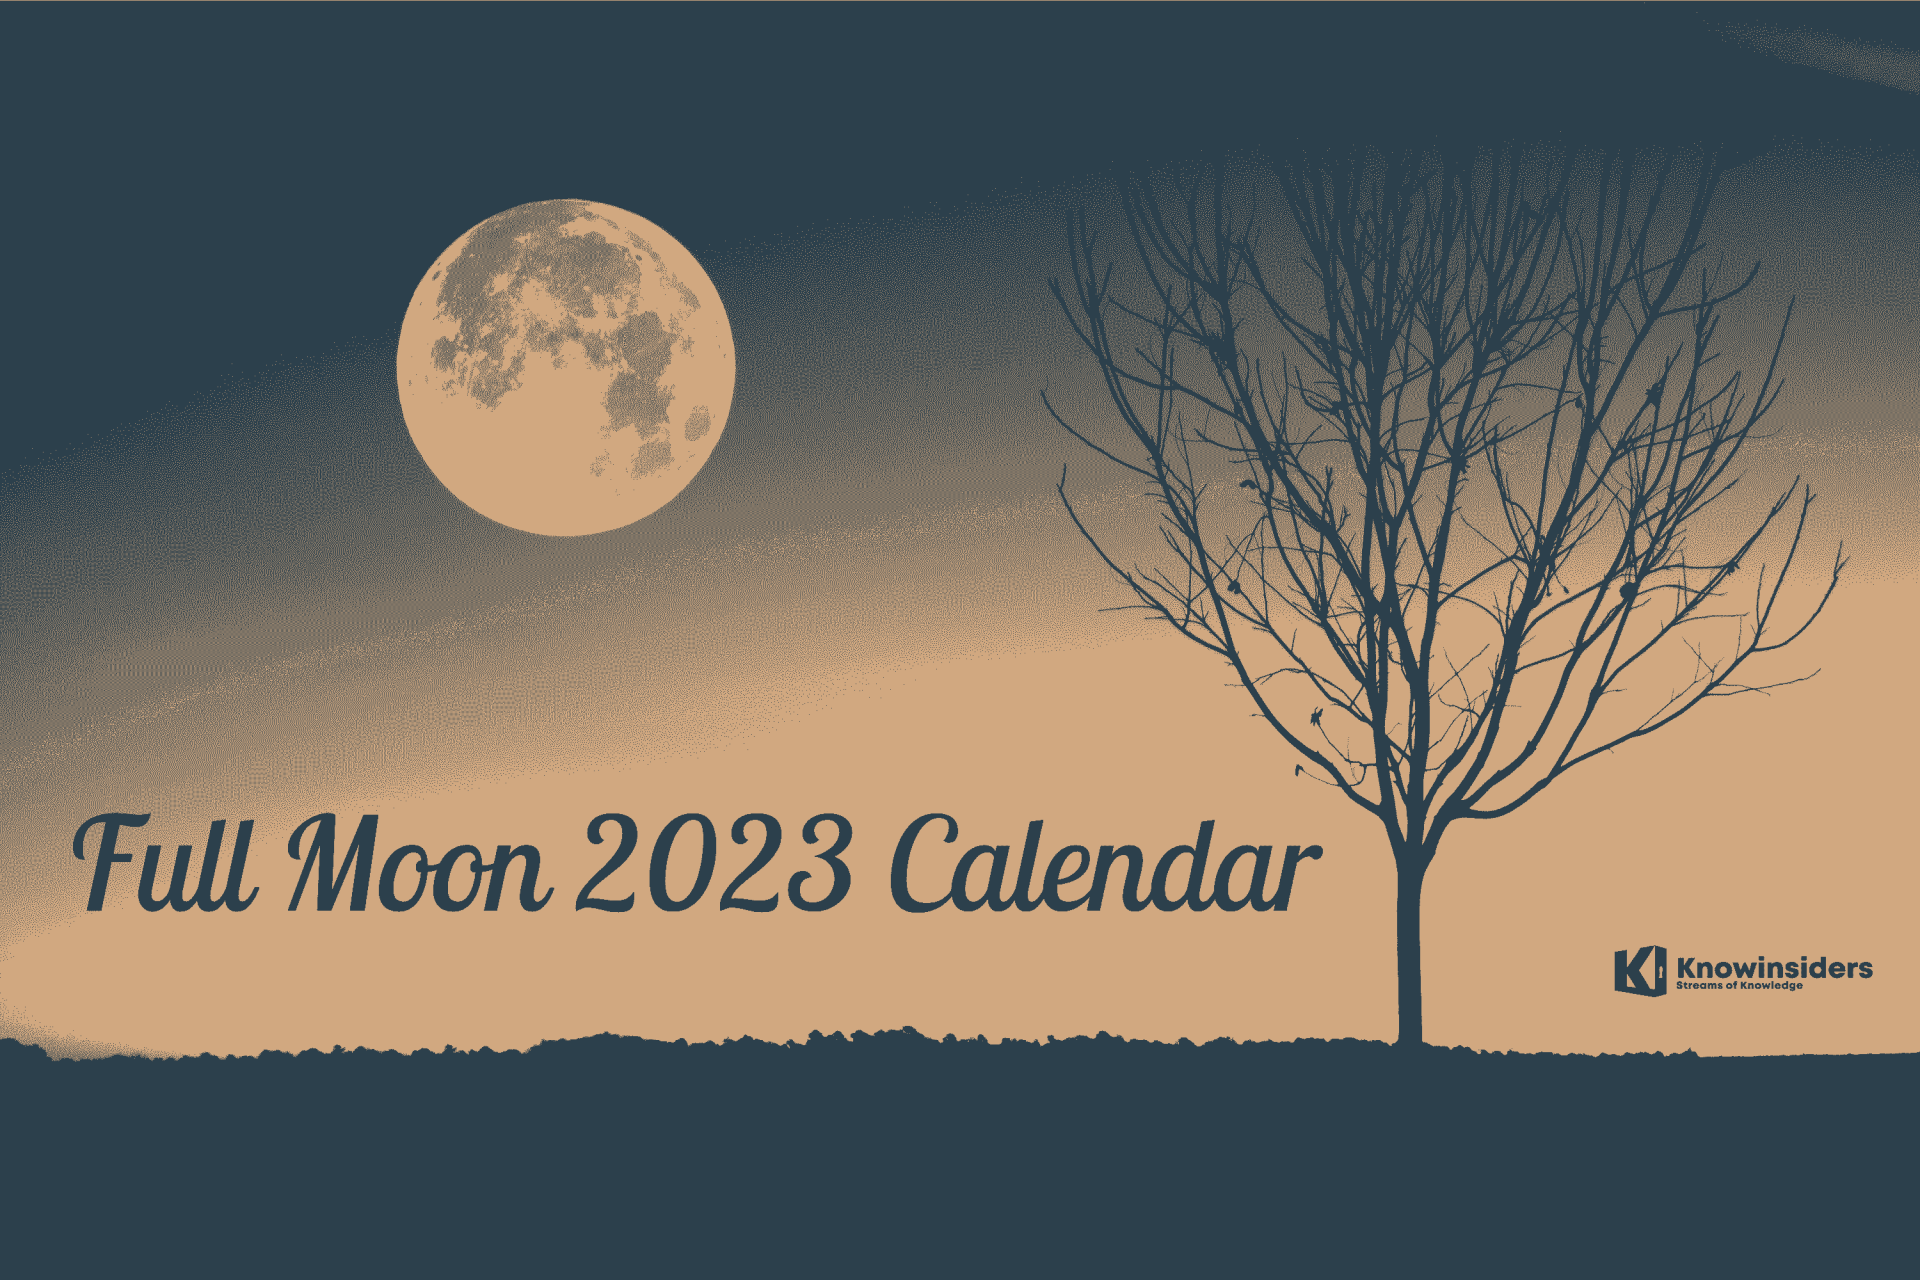 Full Moon 2023 Calendar: Name, Dates, Time and Full Schedule